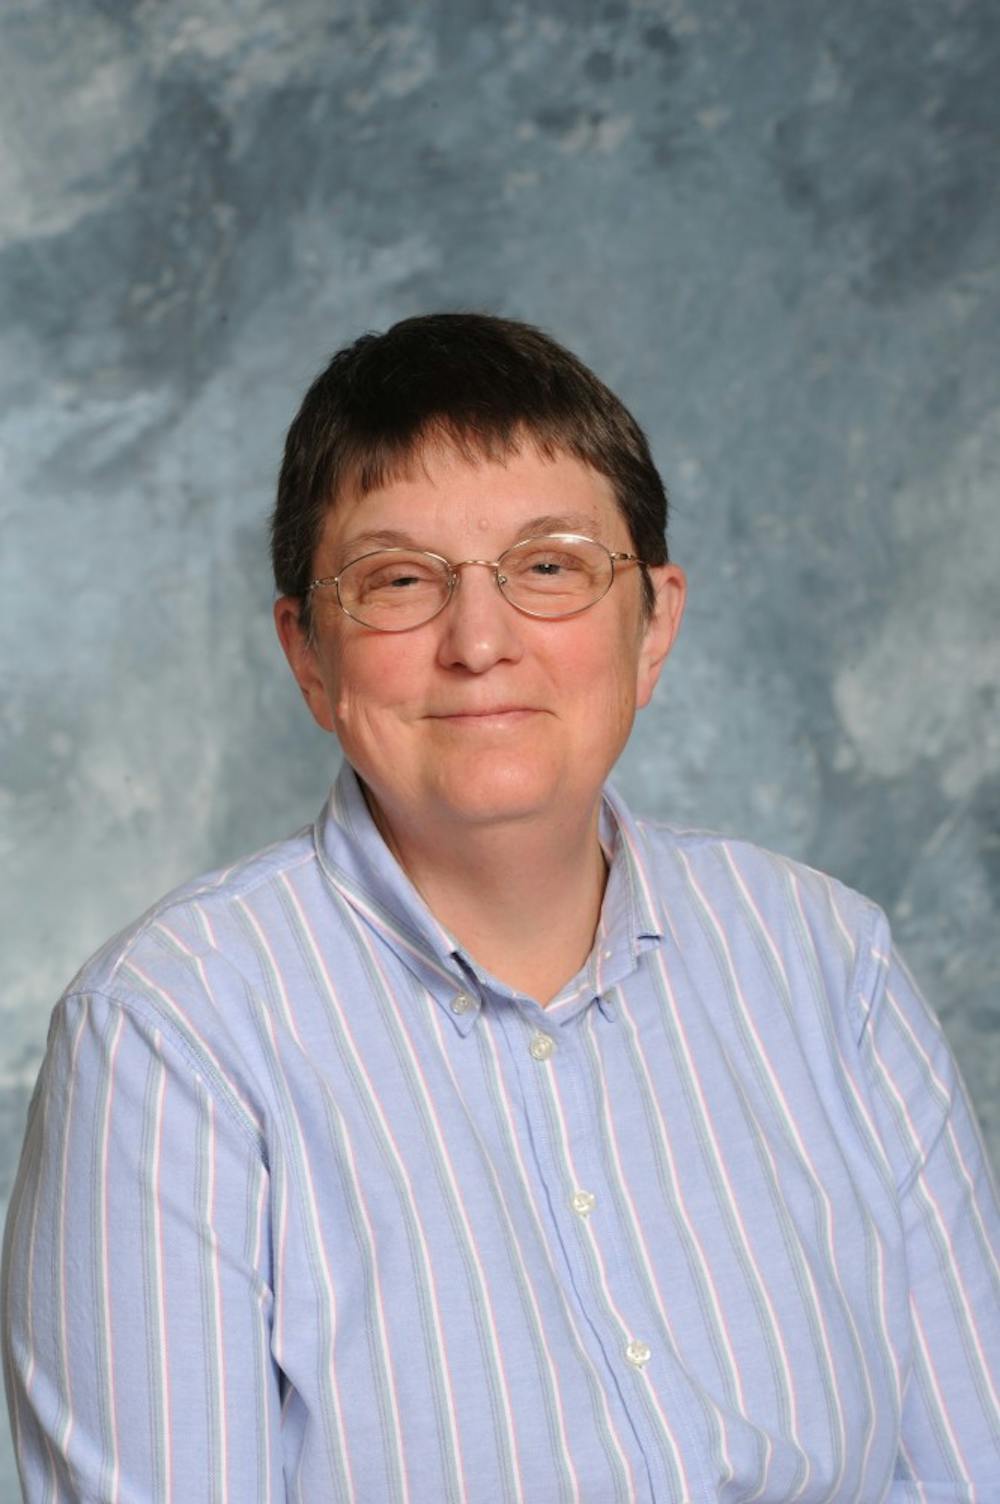 <p>Lois Szudy will be retiring at the end of the semester after 25 years of service to the Otterbein community. </p>